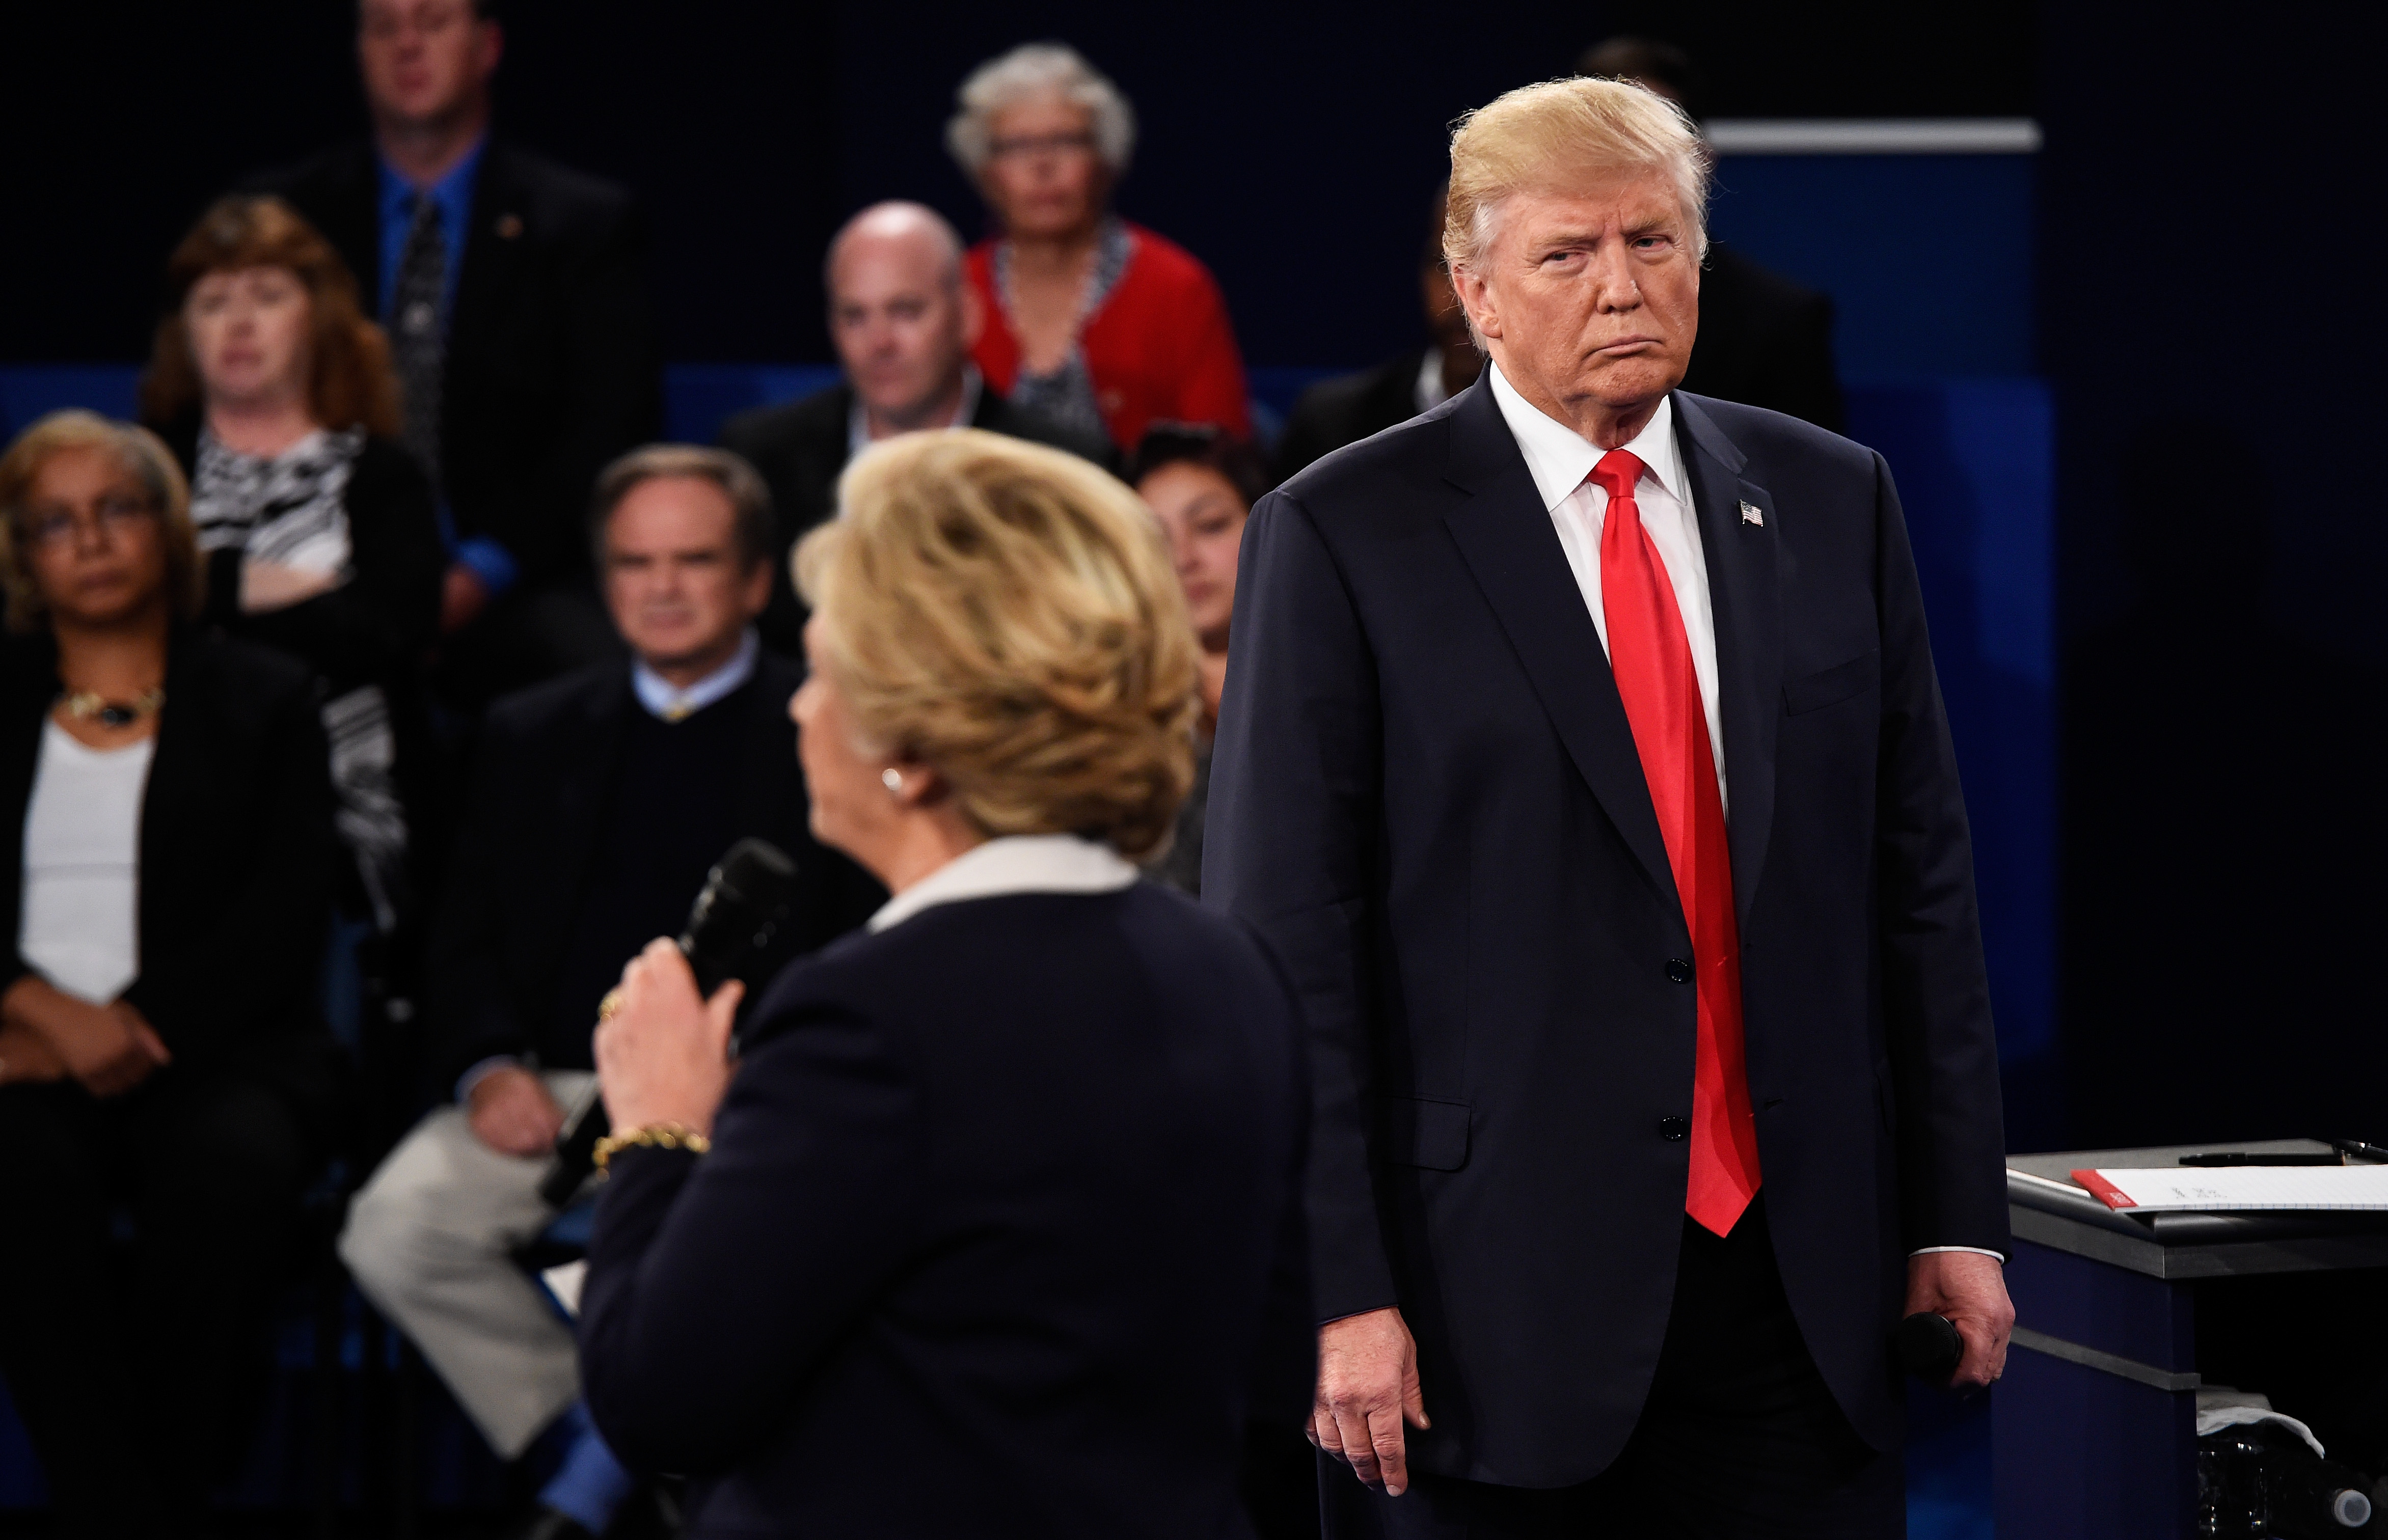 Donald Trump and Hillary Clinton share the stage in the second presidential debate